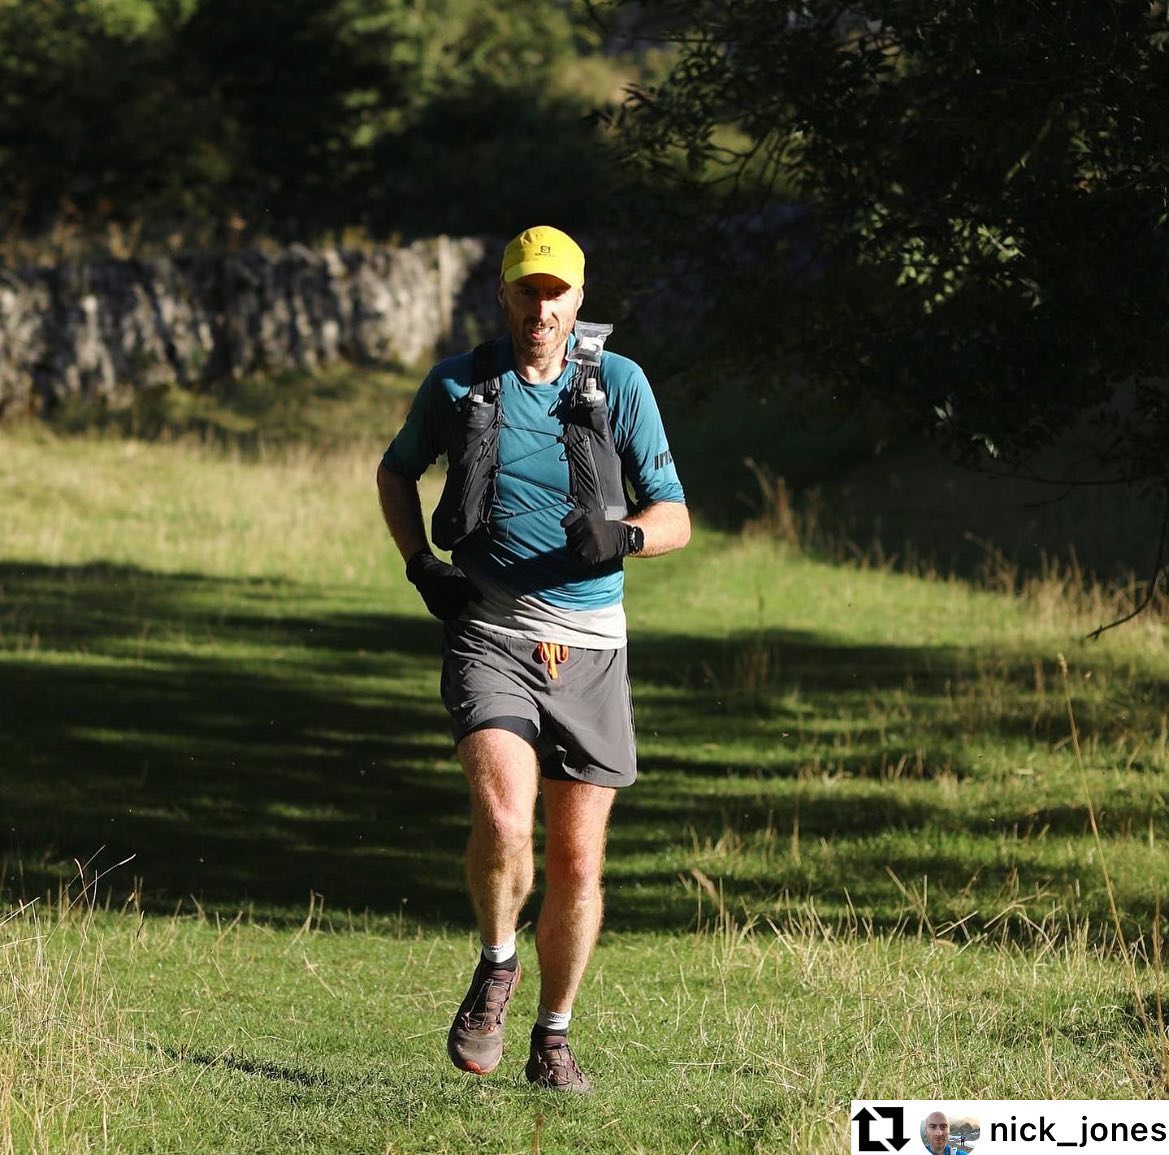 Repost from @nick_jones 

🥈2nd place for the 50km Peak District Challenge on Saturday! A great ro...